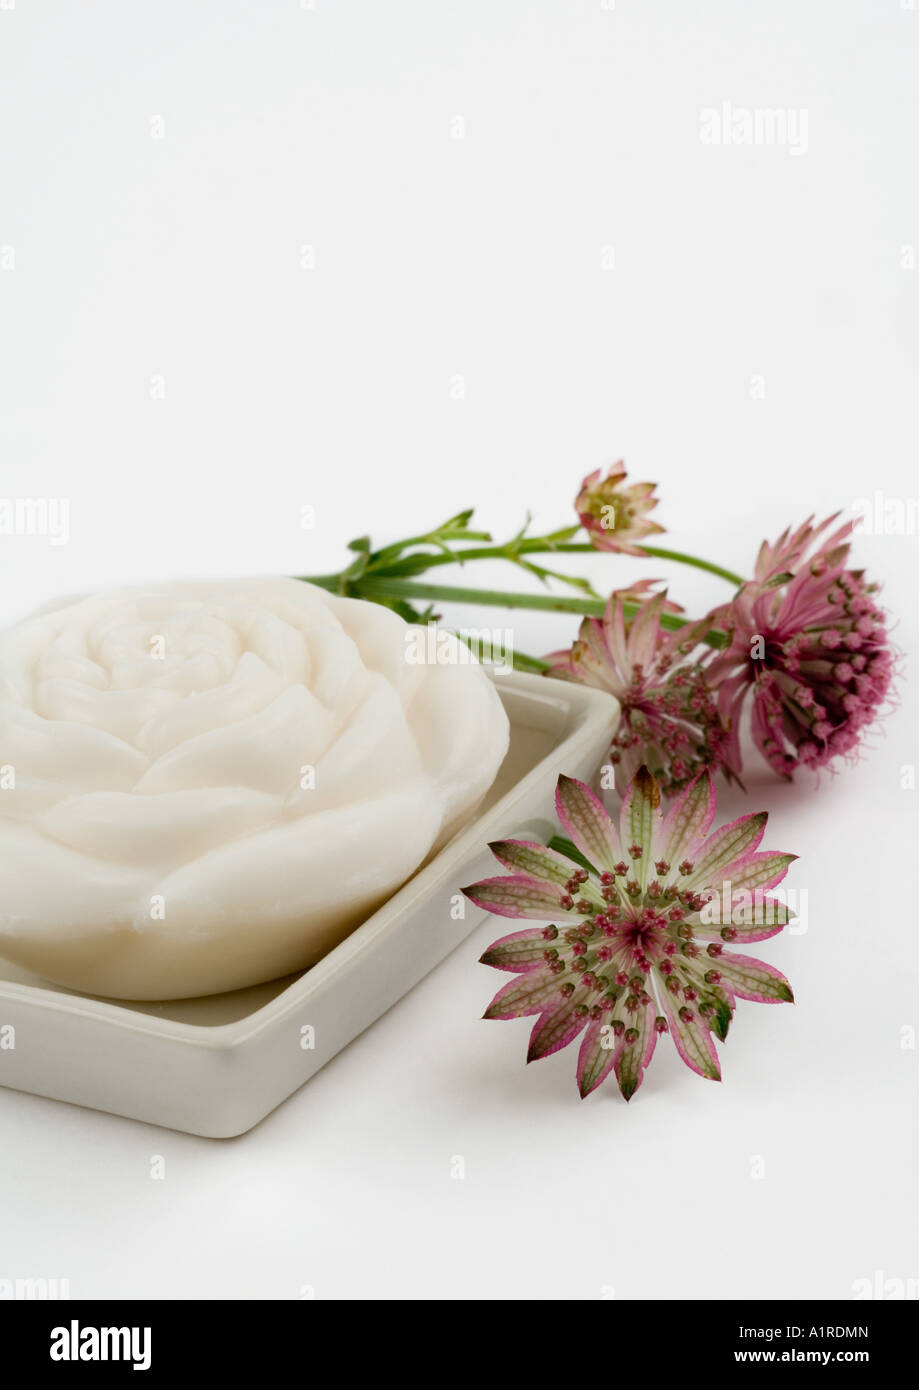 Bars of soap and astrantia flowers Stock Photo